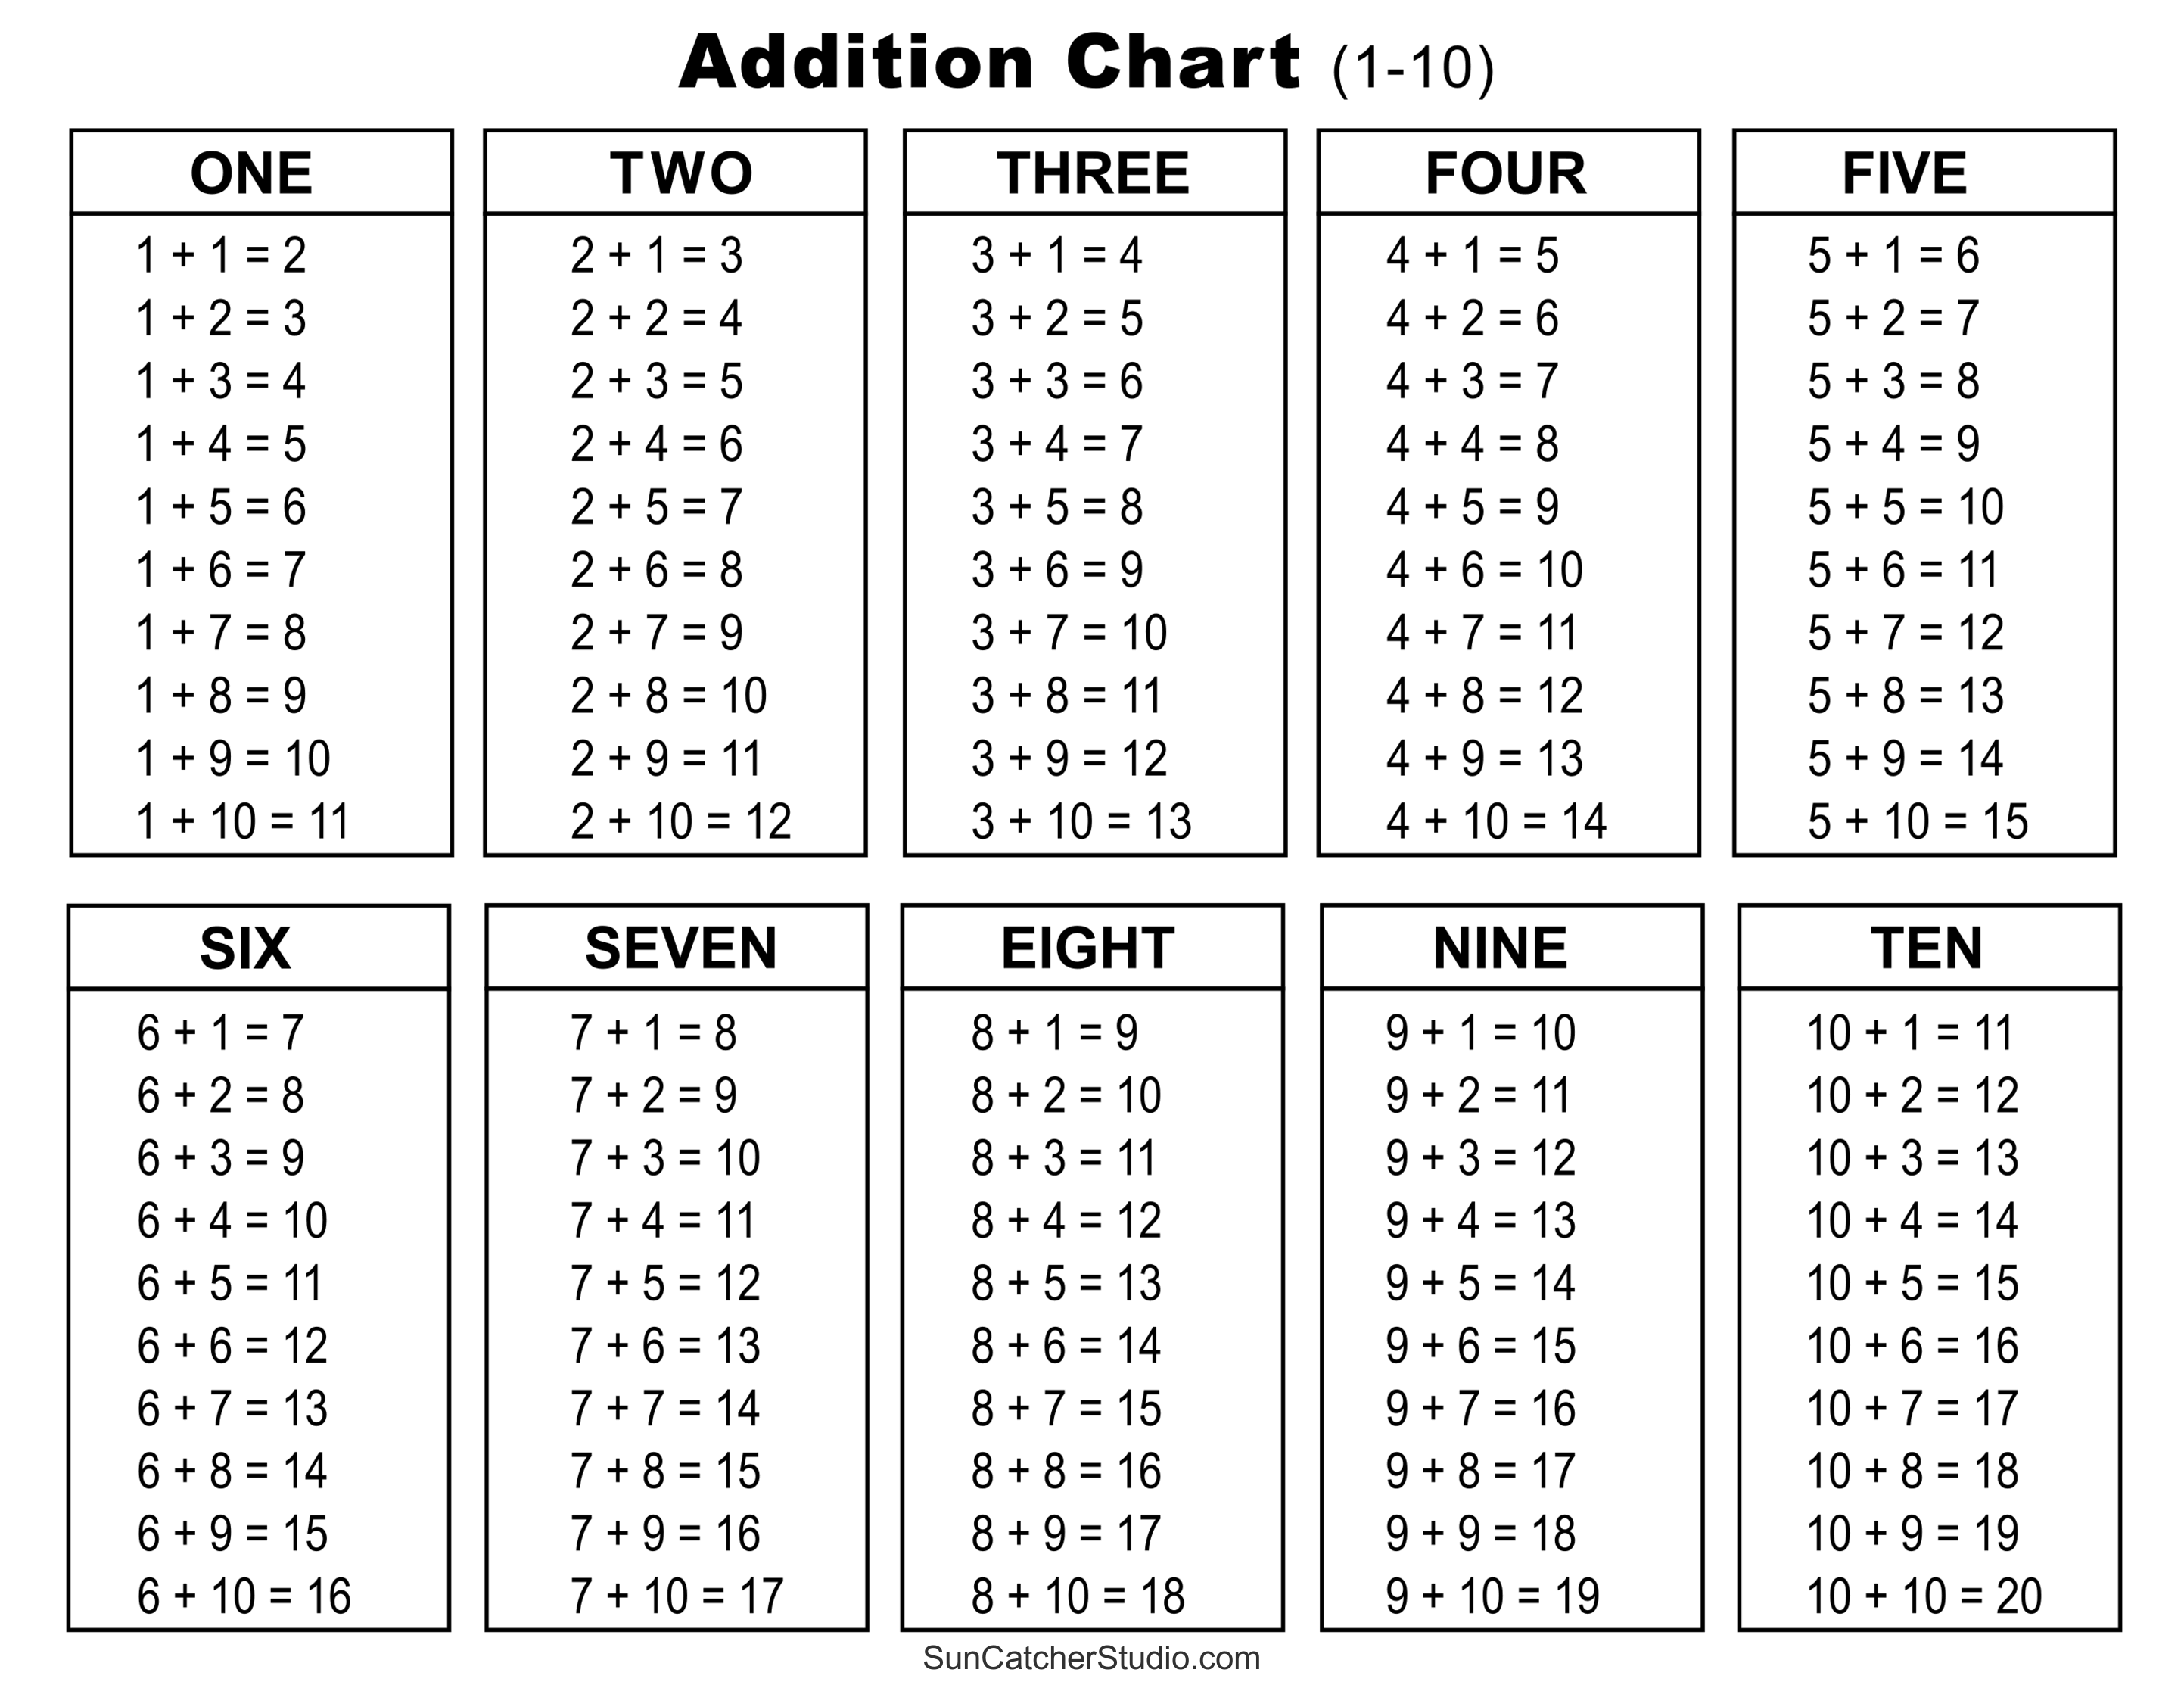 addition-table-10-by-10-free-printables-for-kids-48-off